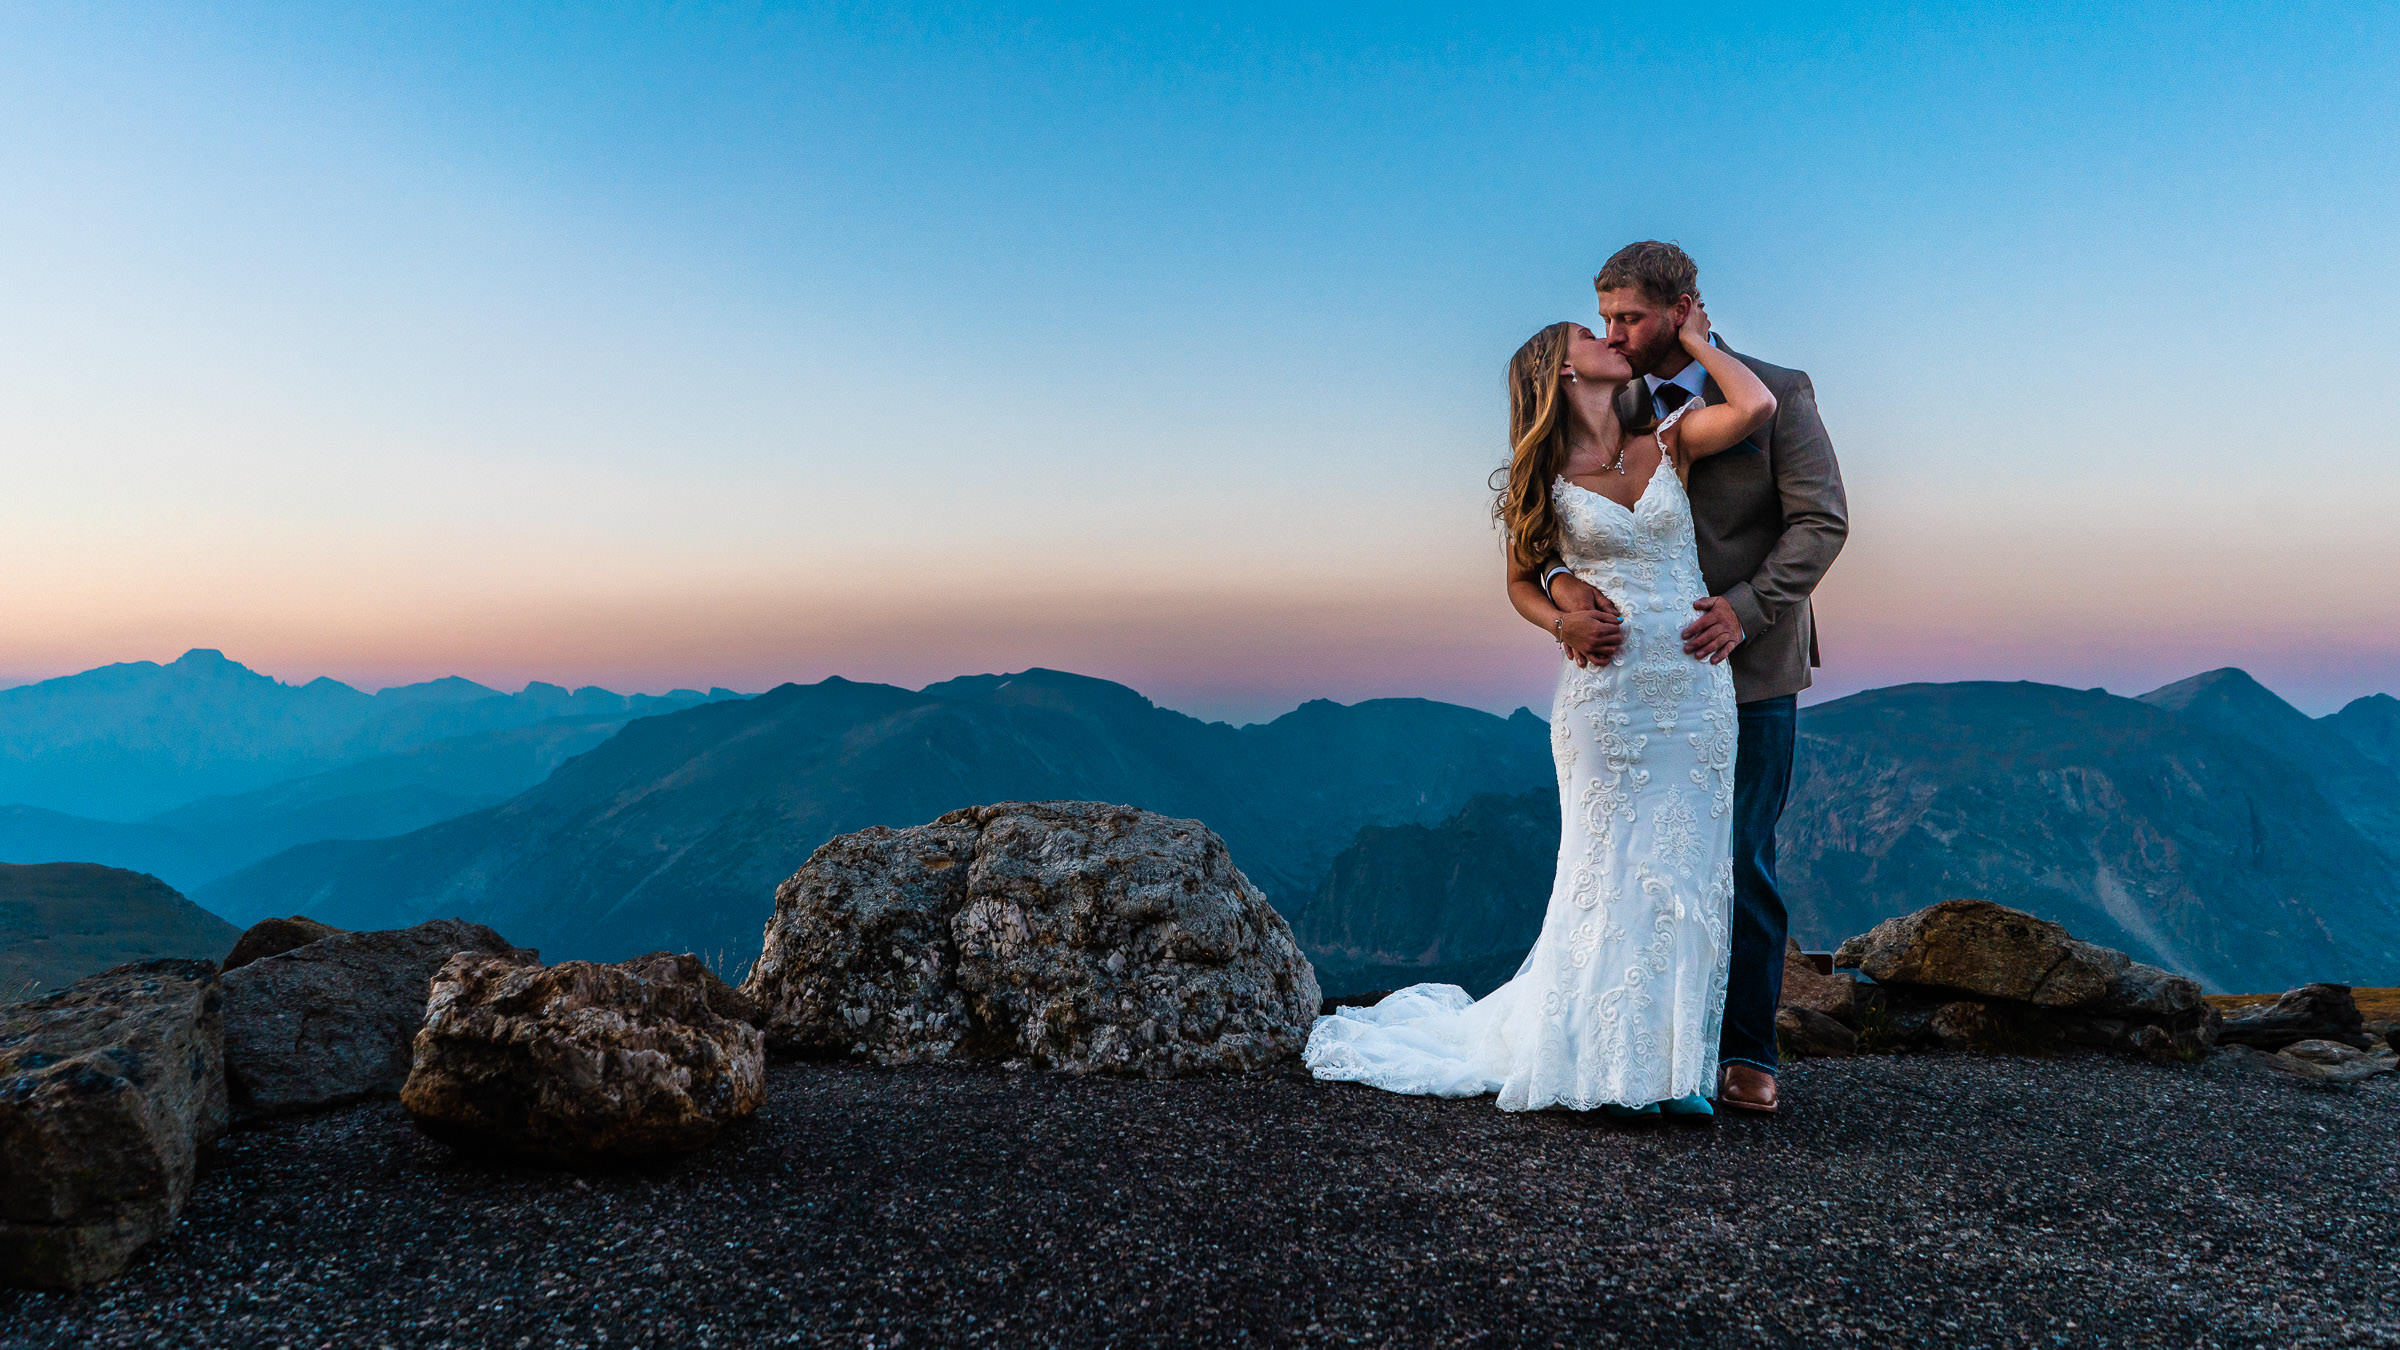 Bride + Groom elope on top of a mountain on Trail Ridge Road in RMNP